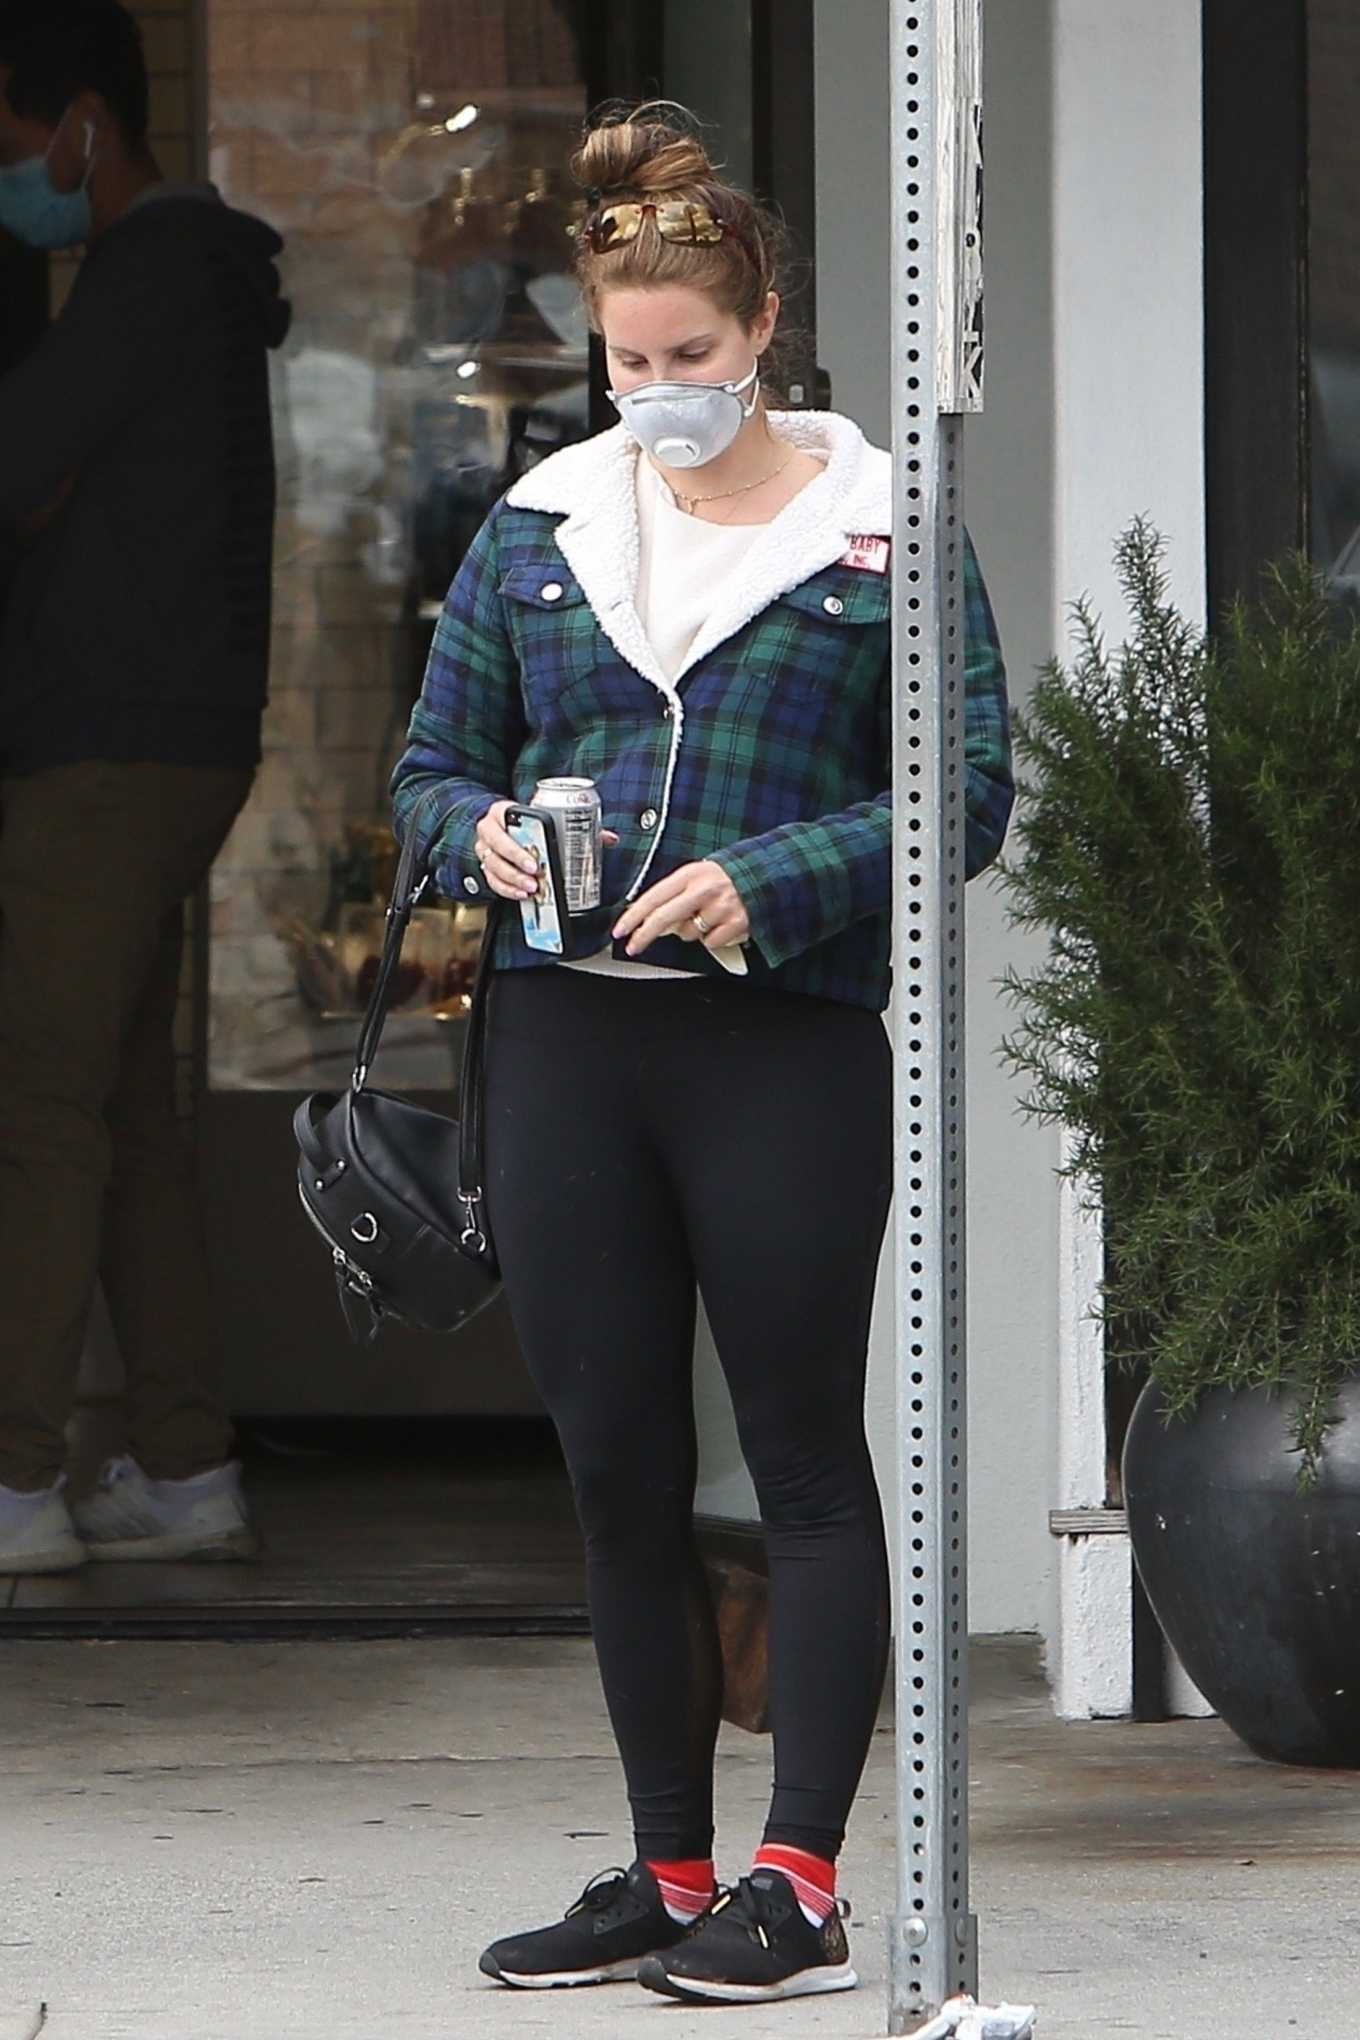 Lana Del Rey â€“ Wear Mask While Out In Los Angeles